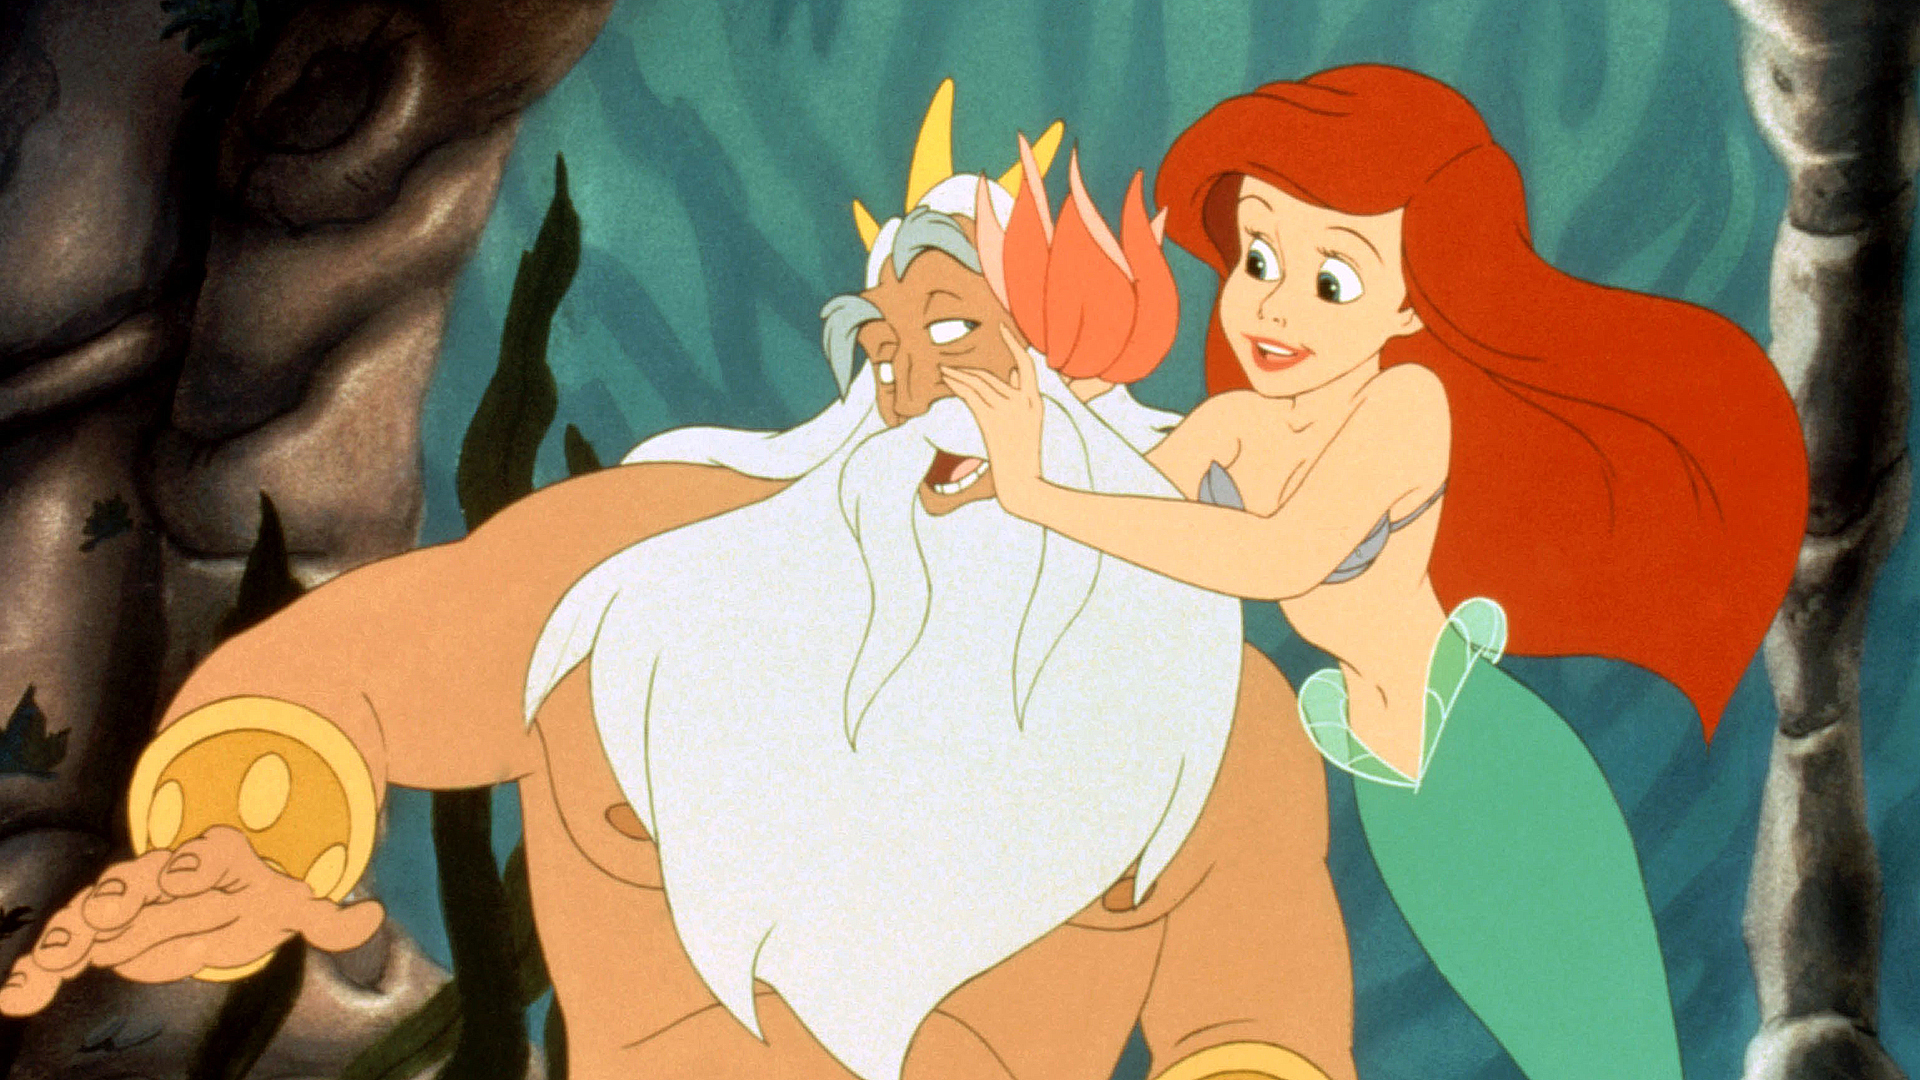 Character Breakdown: What Makes Ariel More Than Just A Little Mermaid?